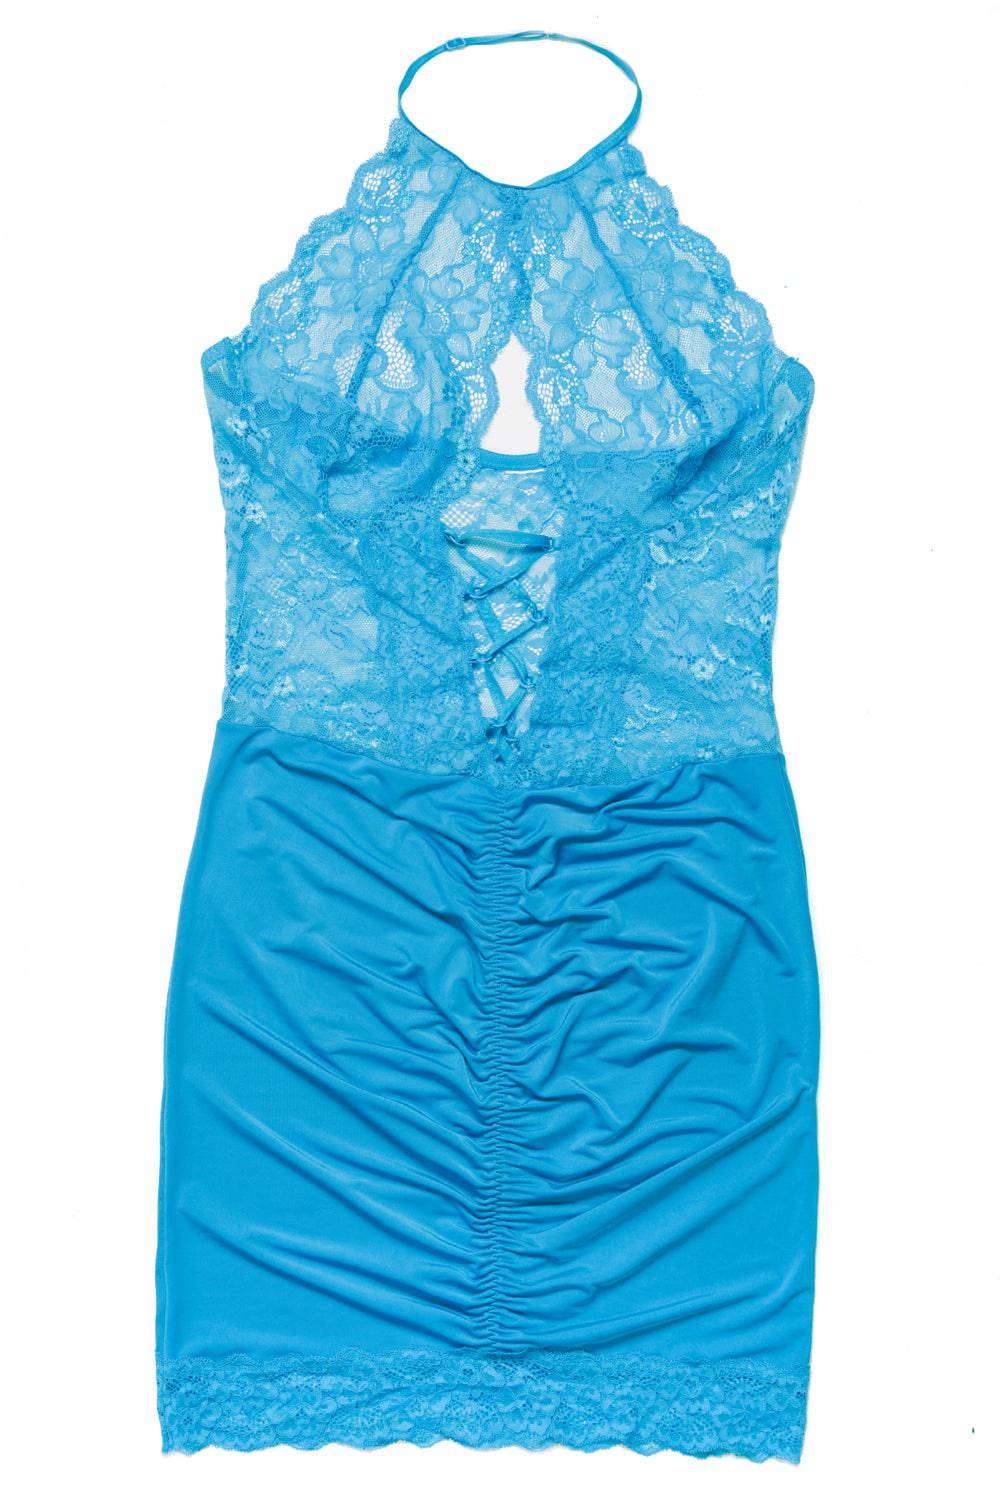 Coquette - 7232 - Chemise - Blue - OS - Stag Shop